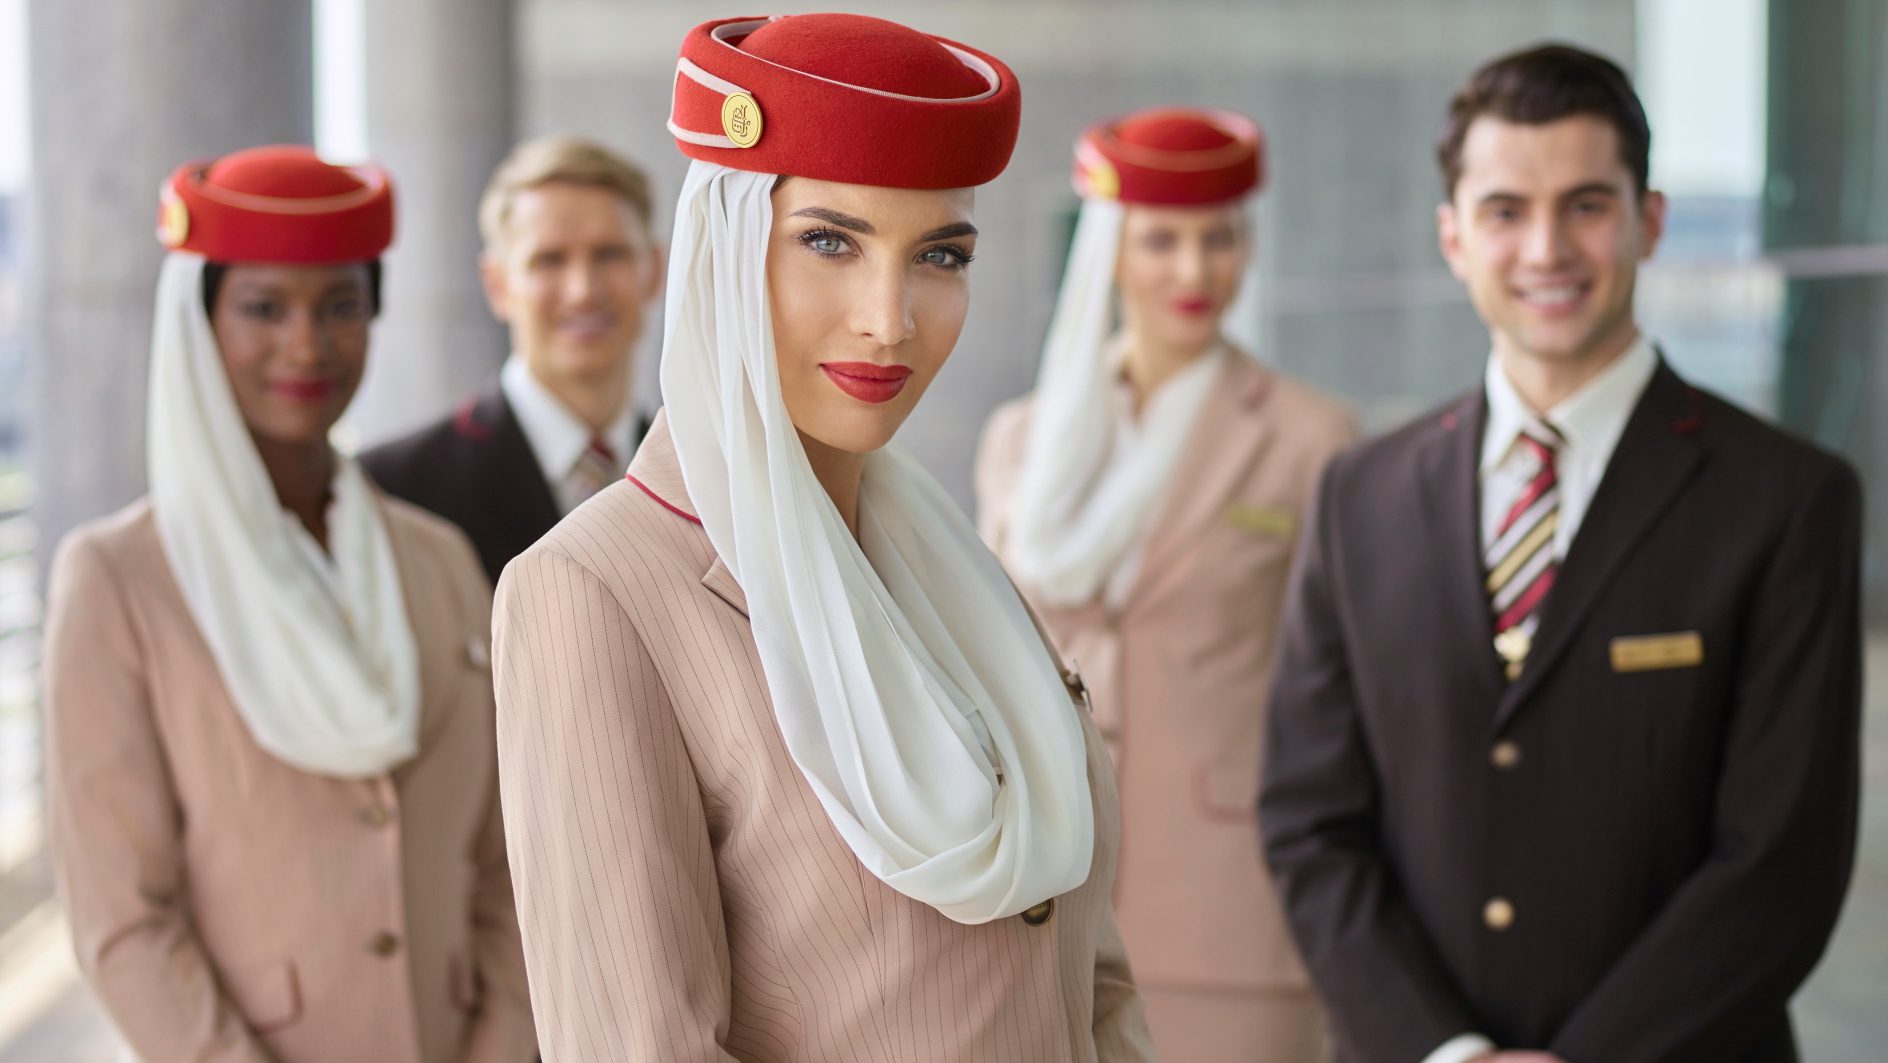 Emirates airline has unveiled plans to boost its operational workforce by more than 6,000 employees over the next six months. Click to enlarge.